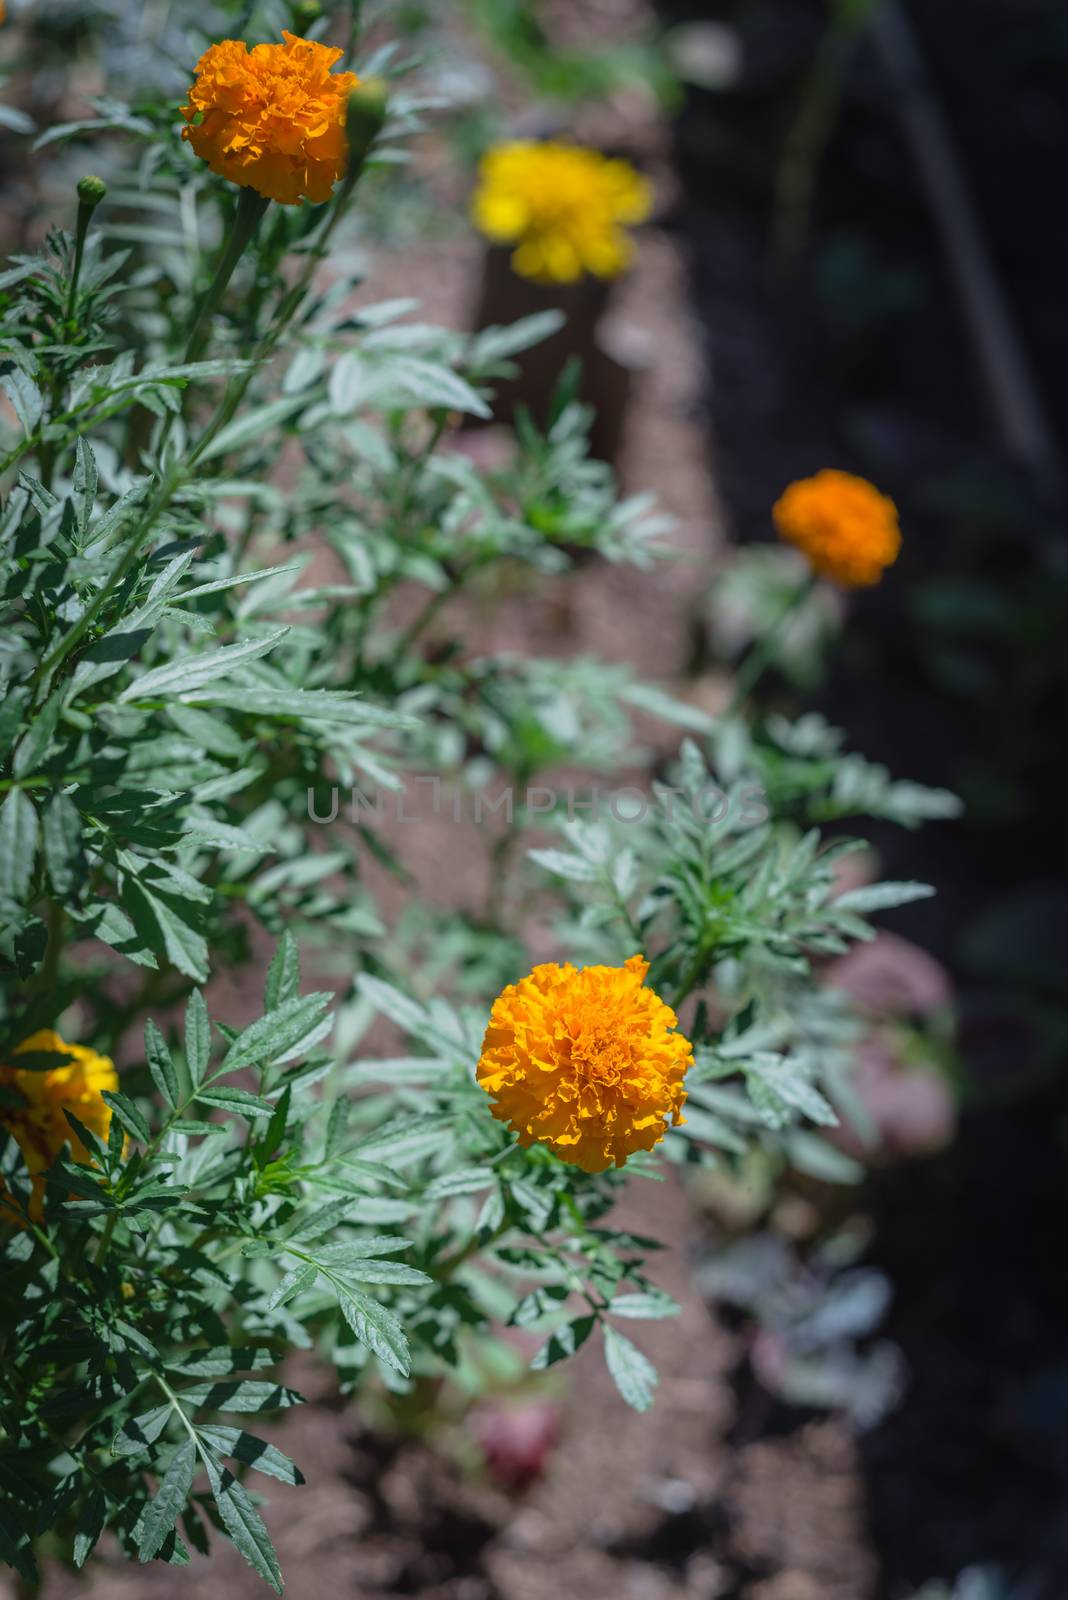 Blossom orange and yellow marigold blossom on raised bed garden near Dallas, Texas, USA by trongnguyen